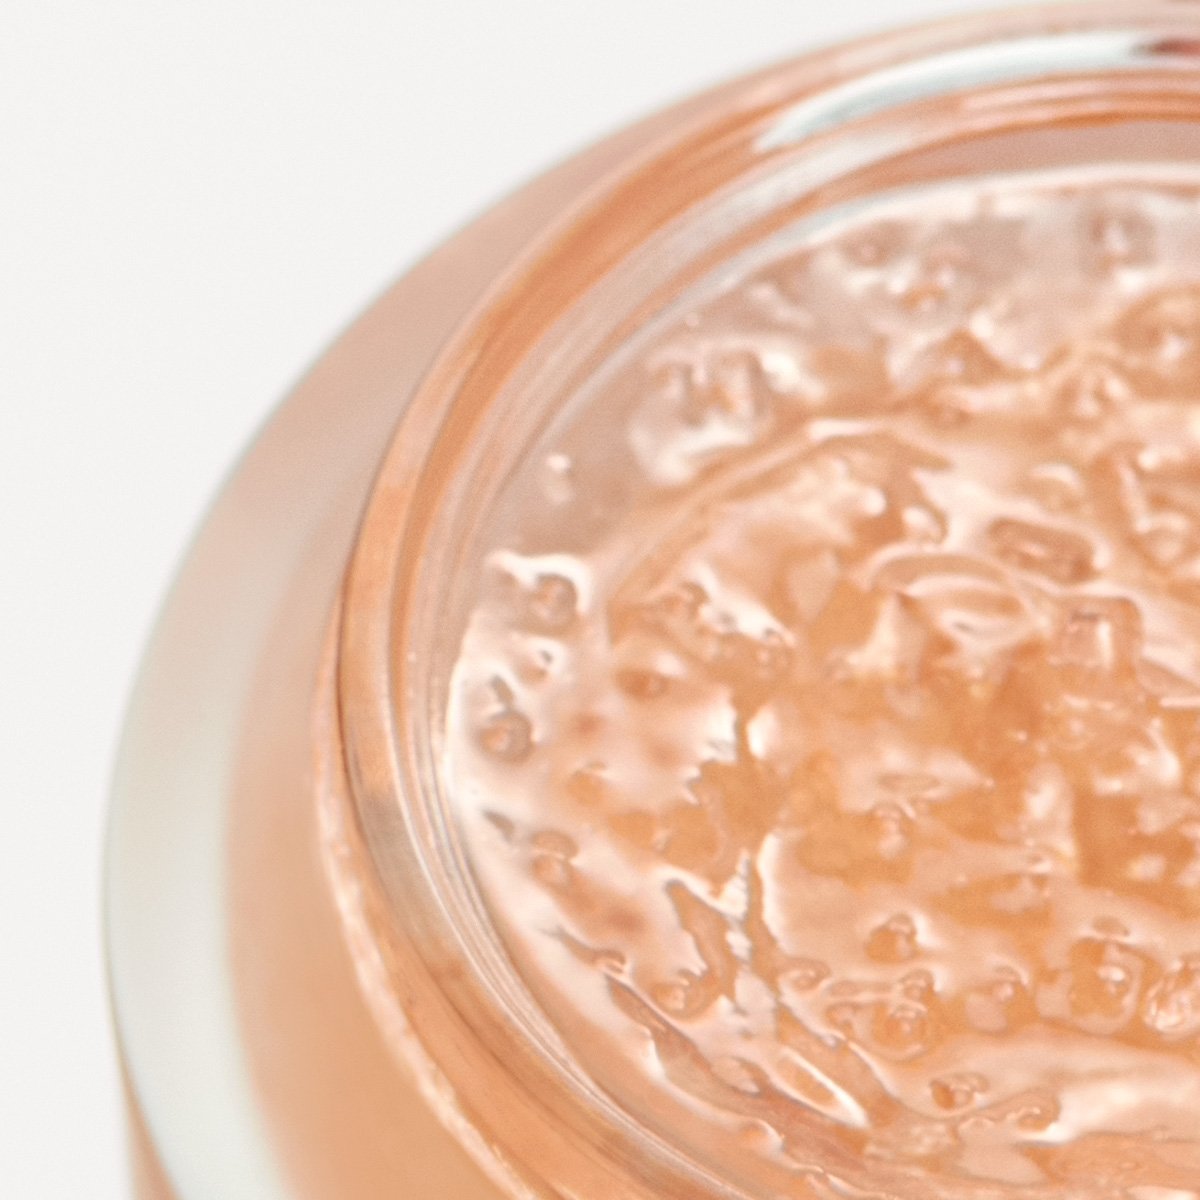 Zoomed in image of the Hydration Replenish Moisturizer that showcases the microencapsulated bead technology